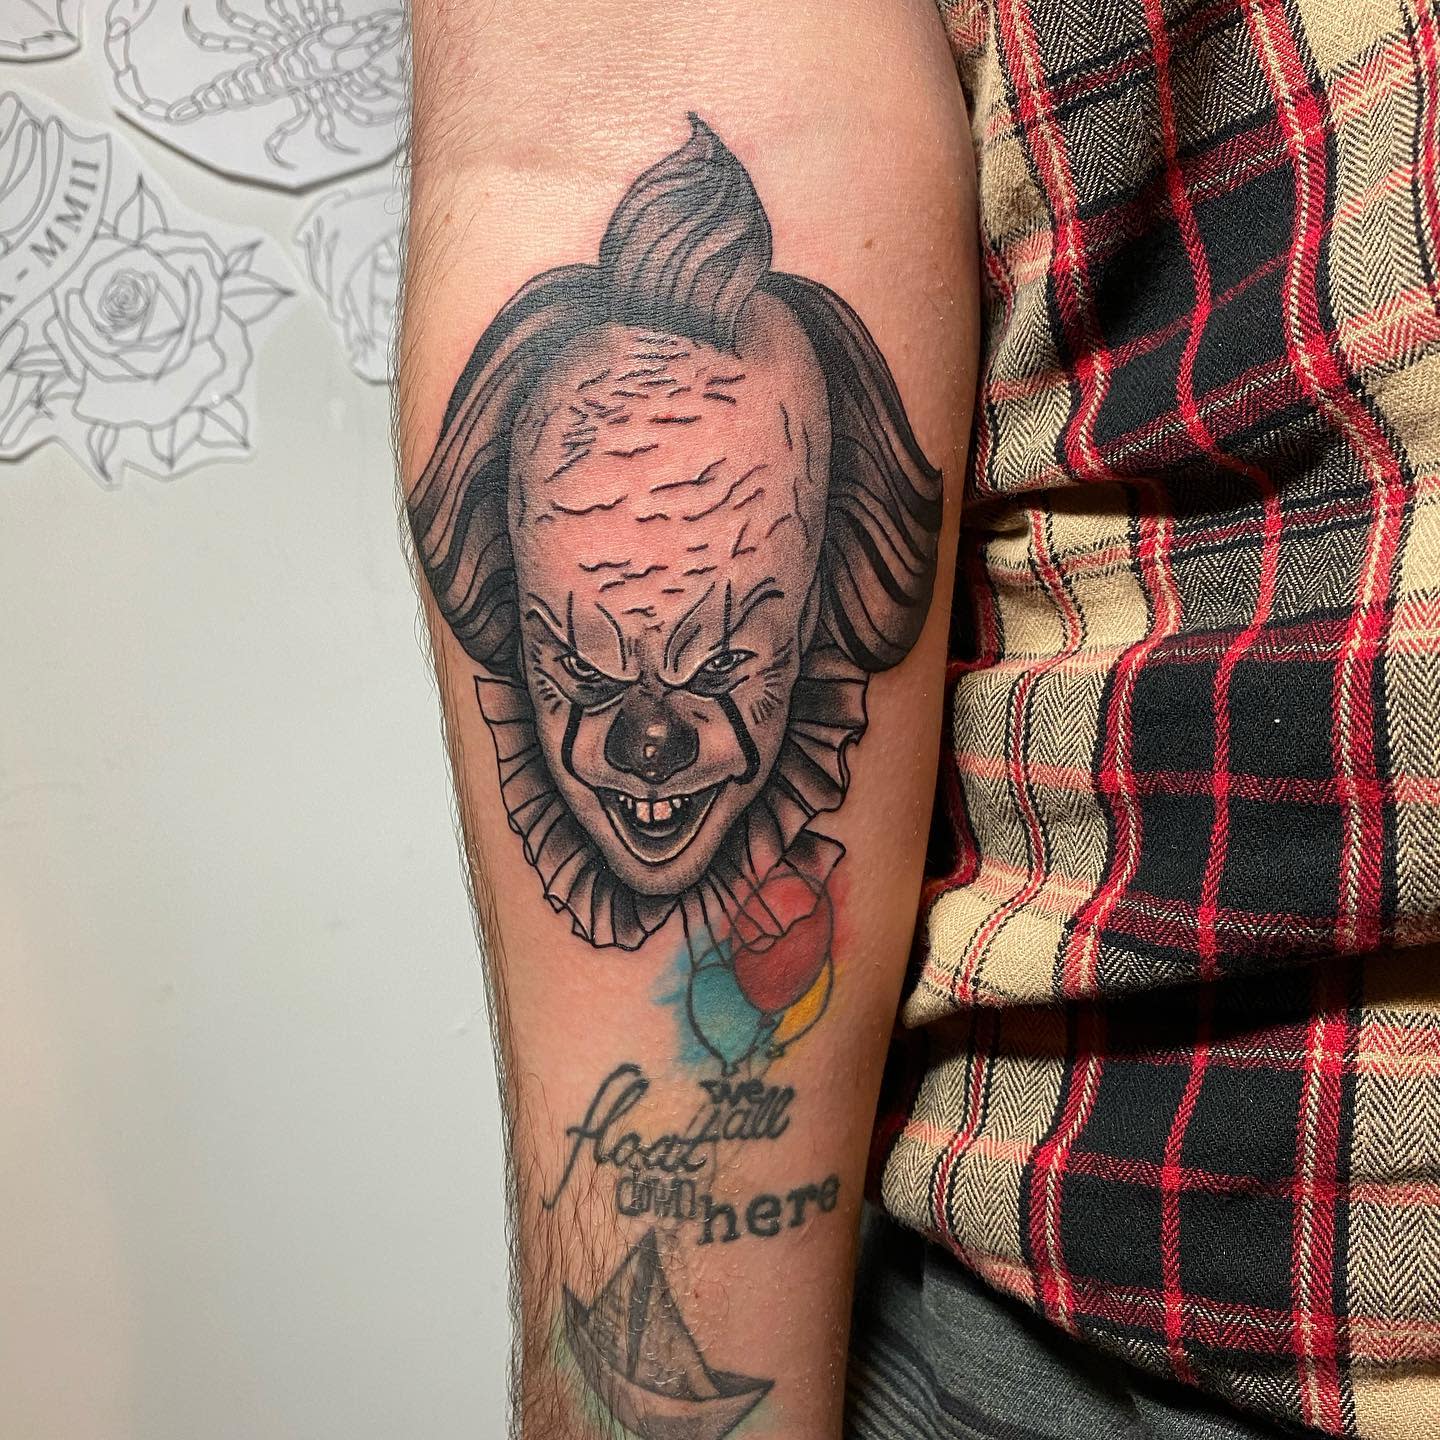 Pennywise the Clown by Robert Pho from Skin Design Tattoo in Honolulu  Hawaii my left shoulder  rtattoo